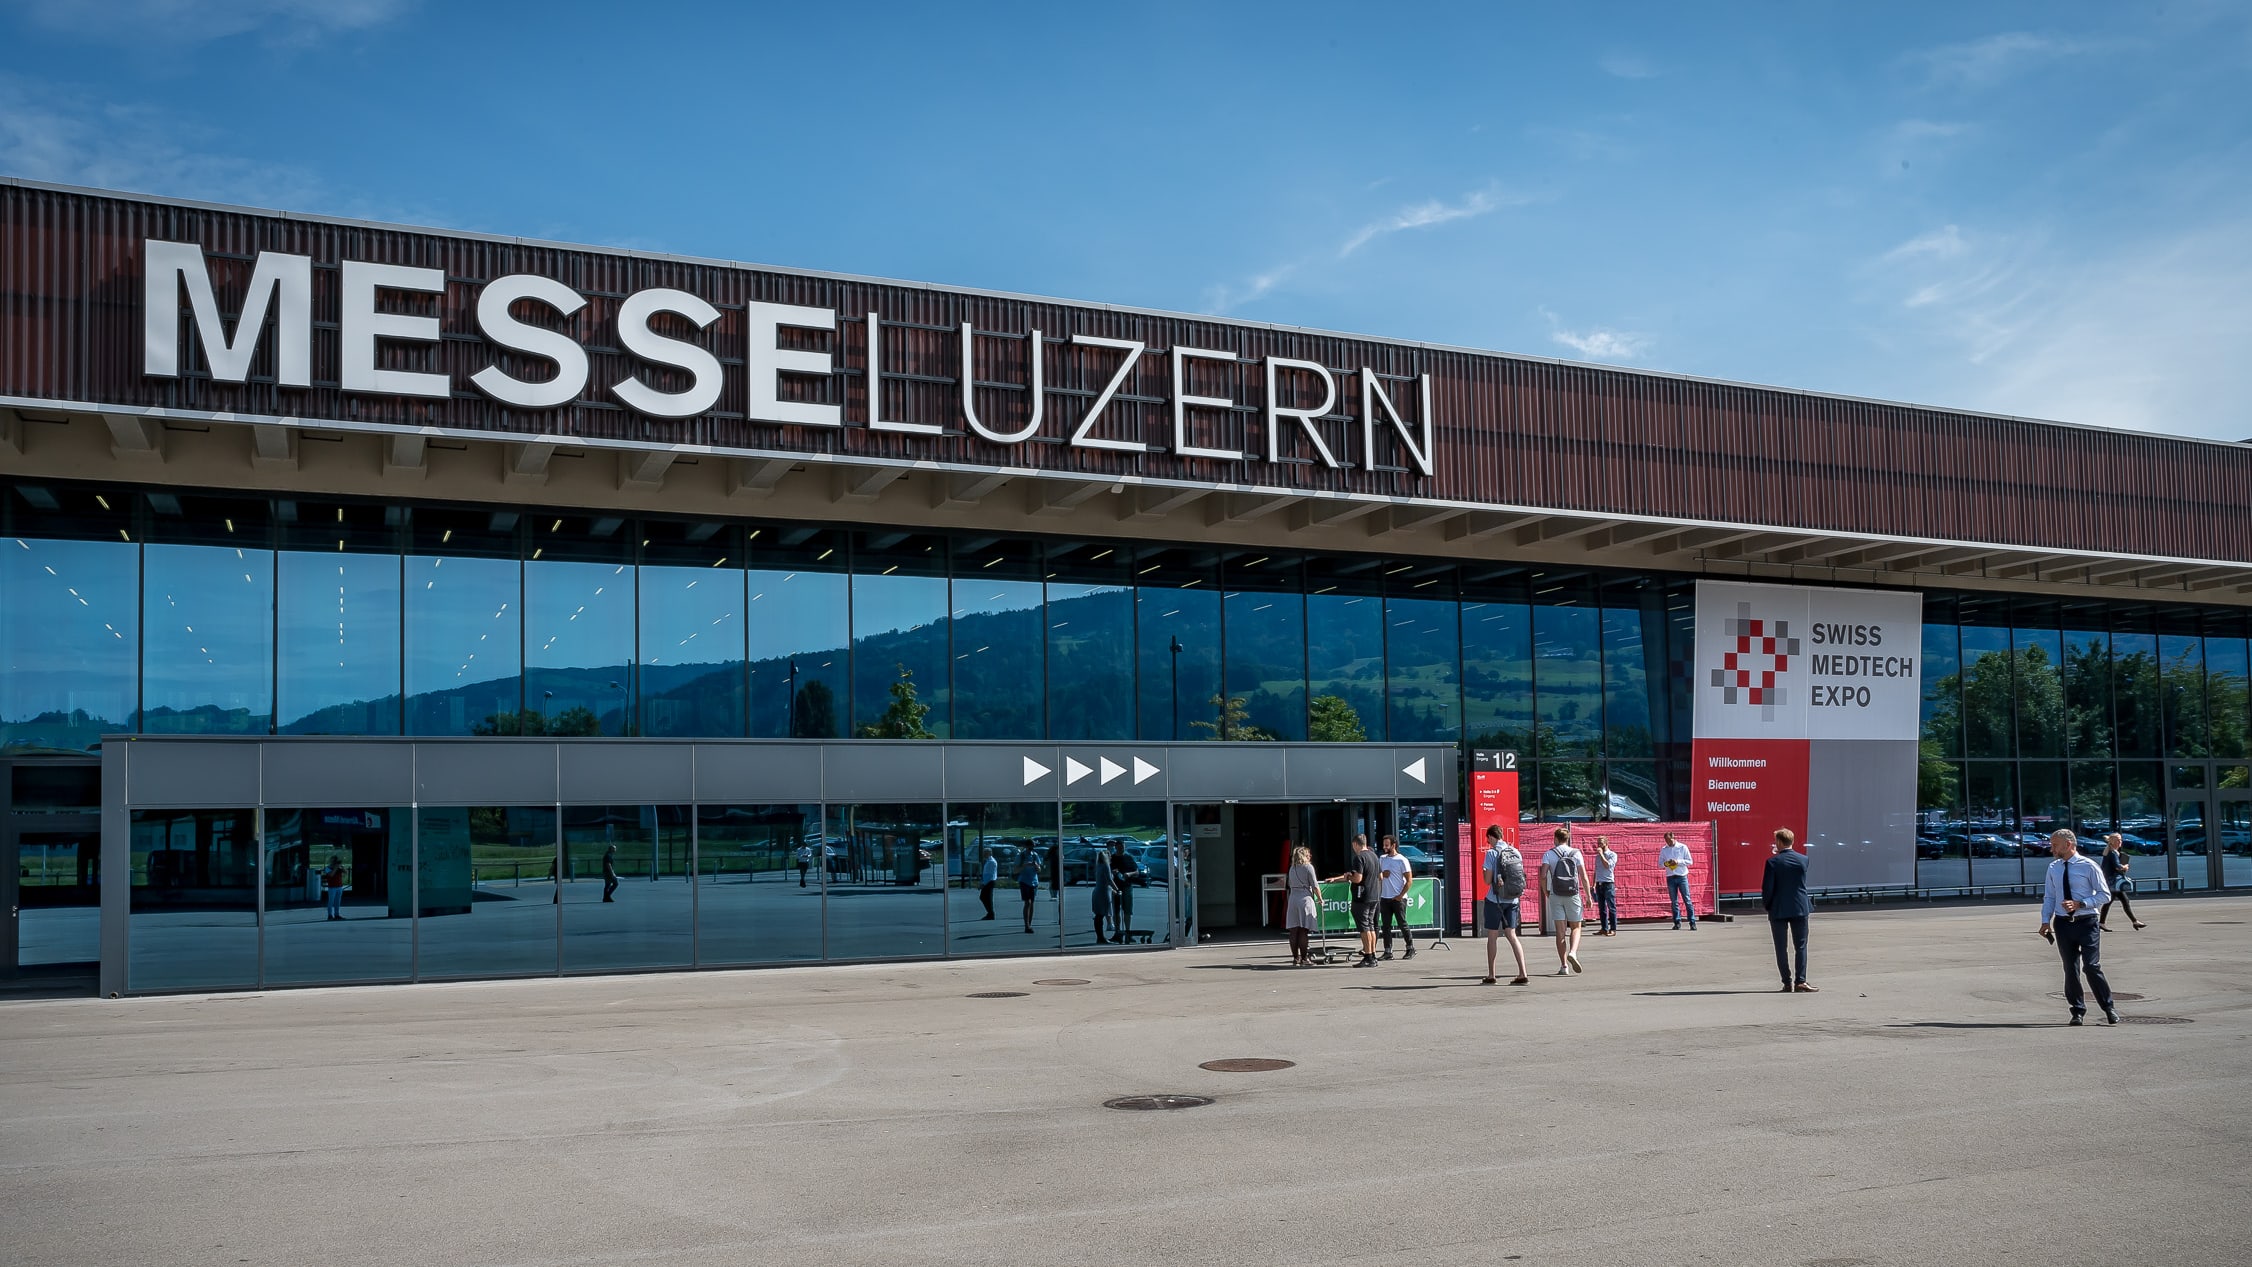 Information on Swiss Medtech Expo